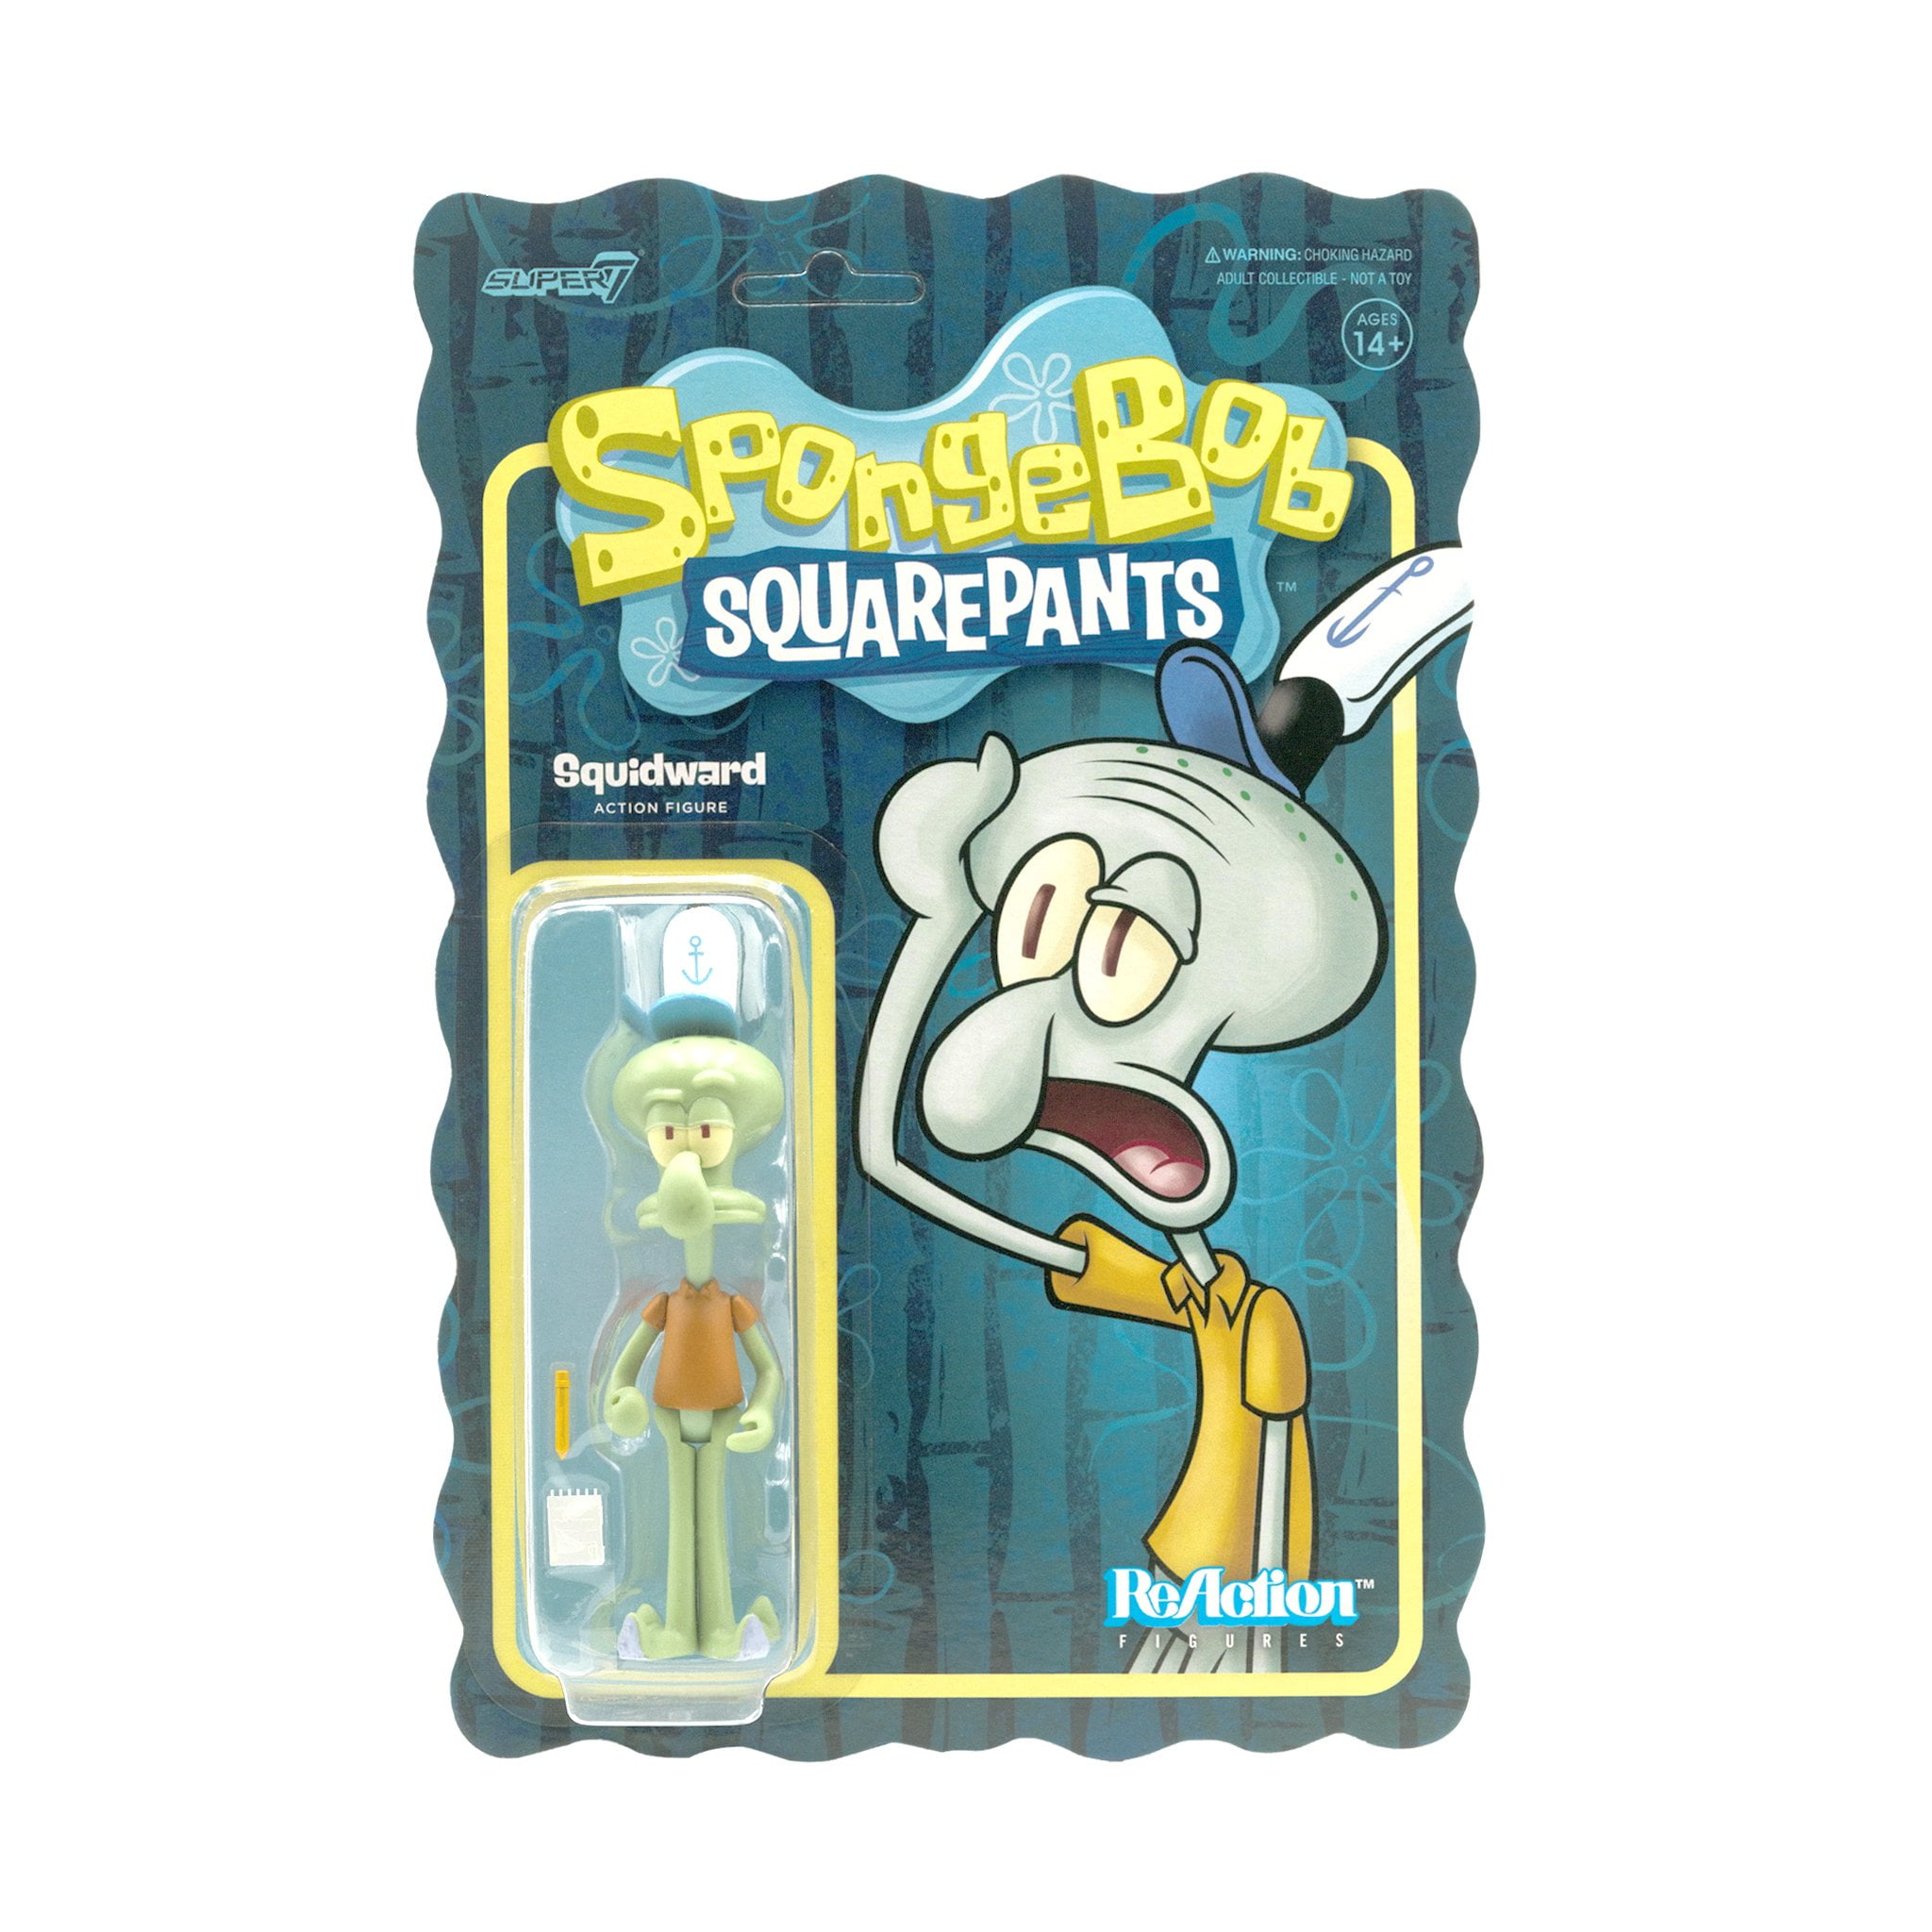 SpongeBob SquarePants Boys'  Exclusive Underwear Multipacks with  Patrick, Squidward and More in Sizes 4, 6, 8, 10 & 12